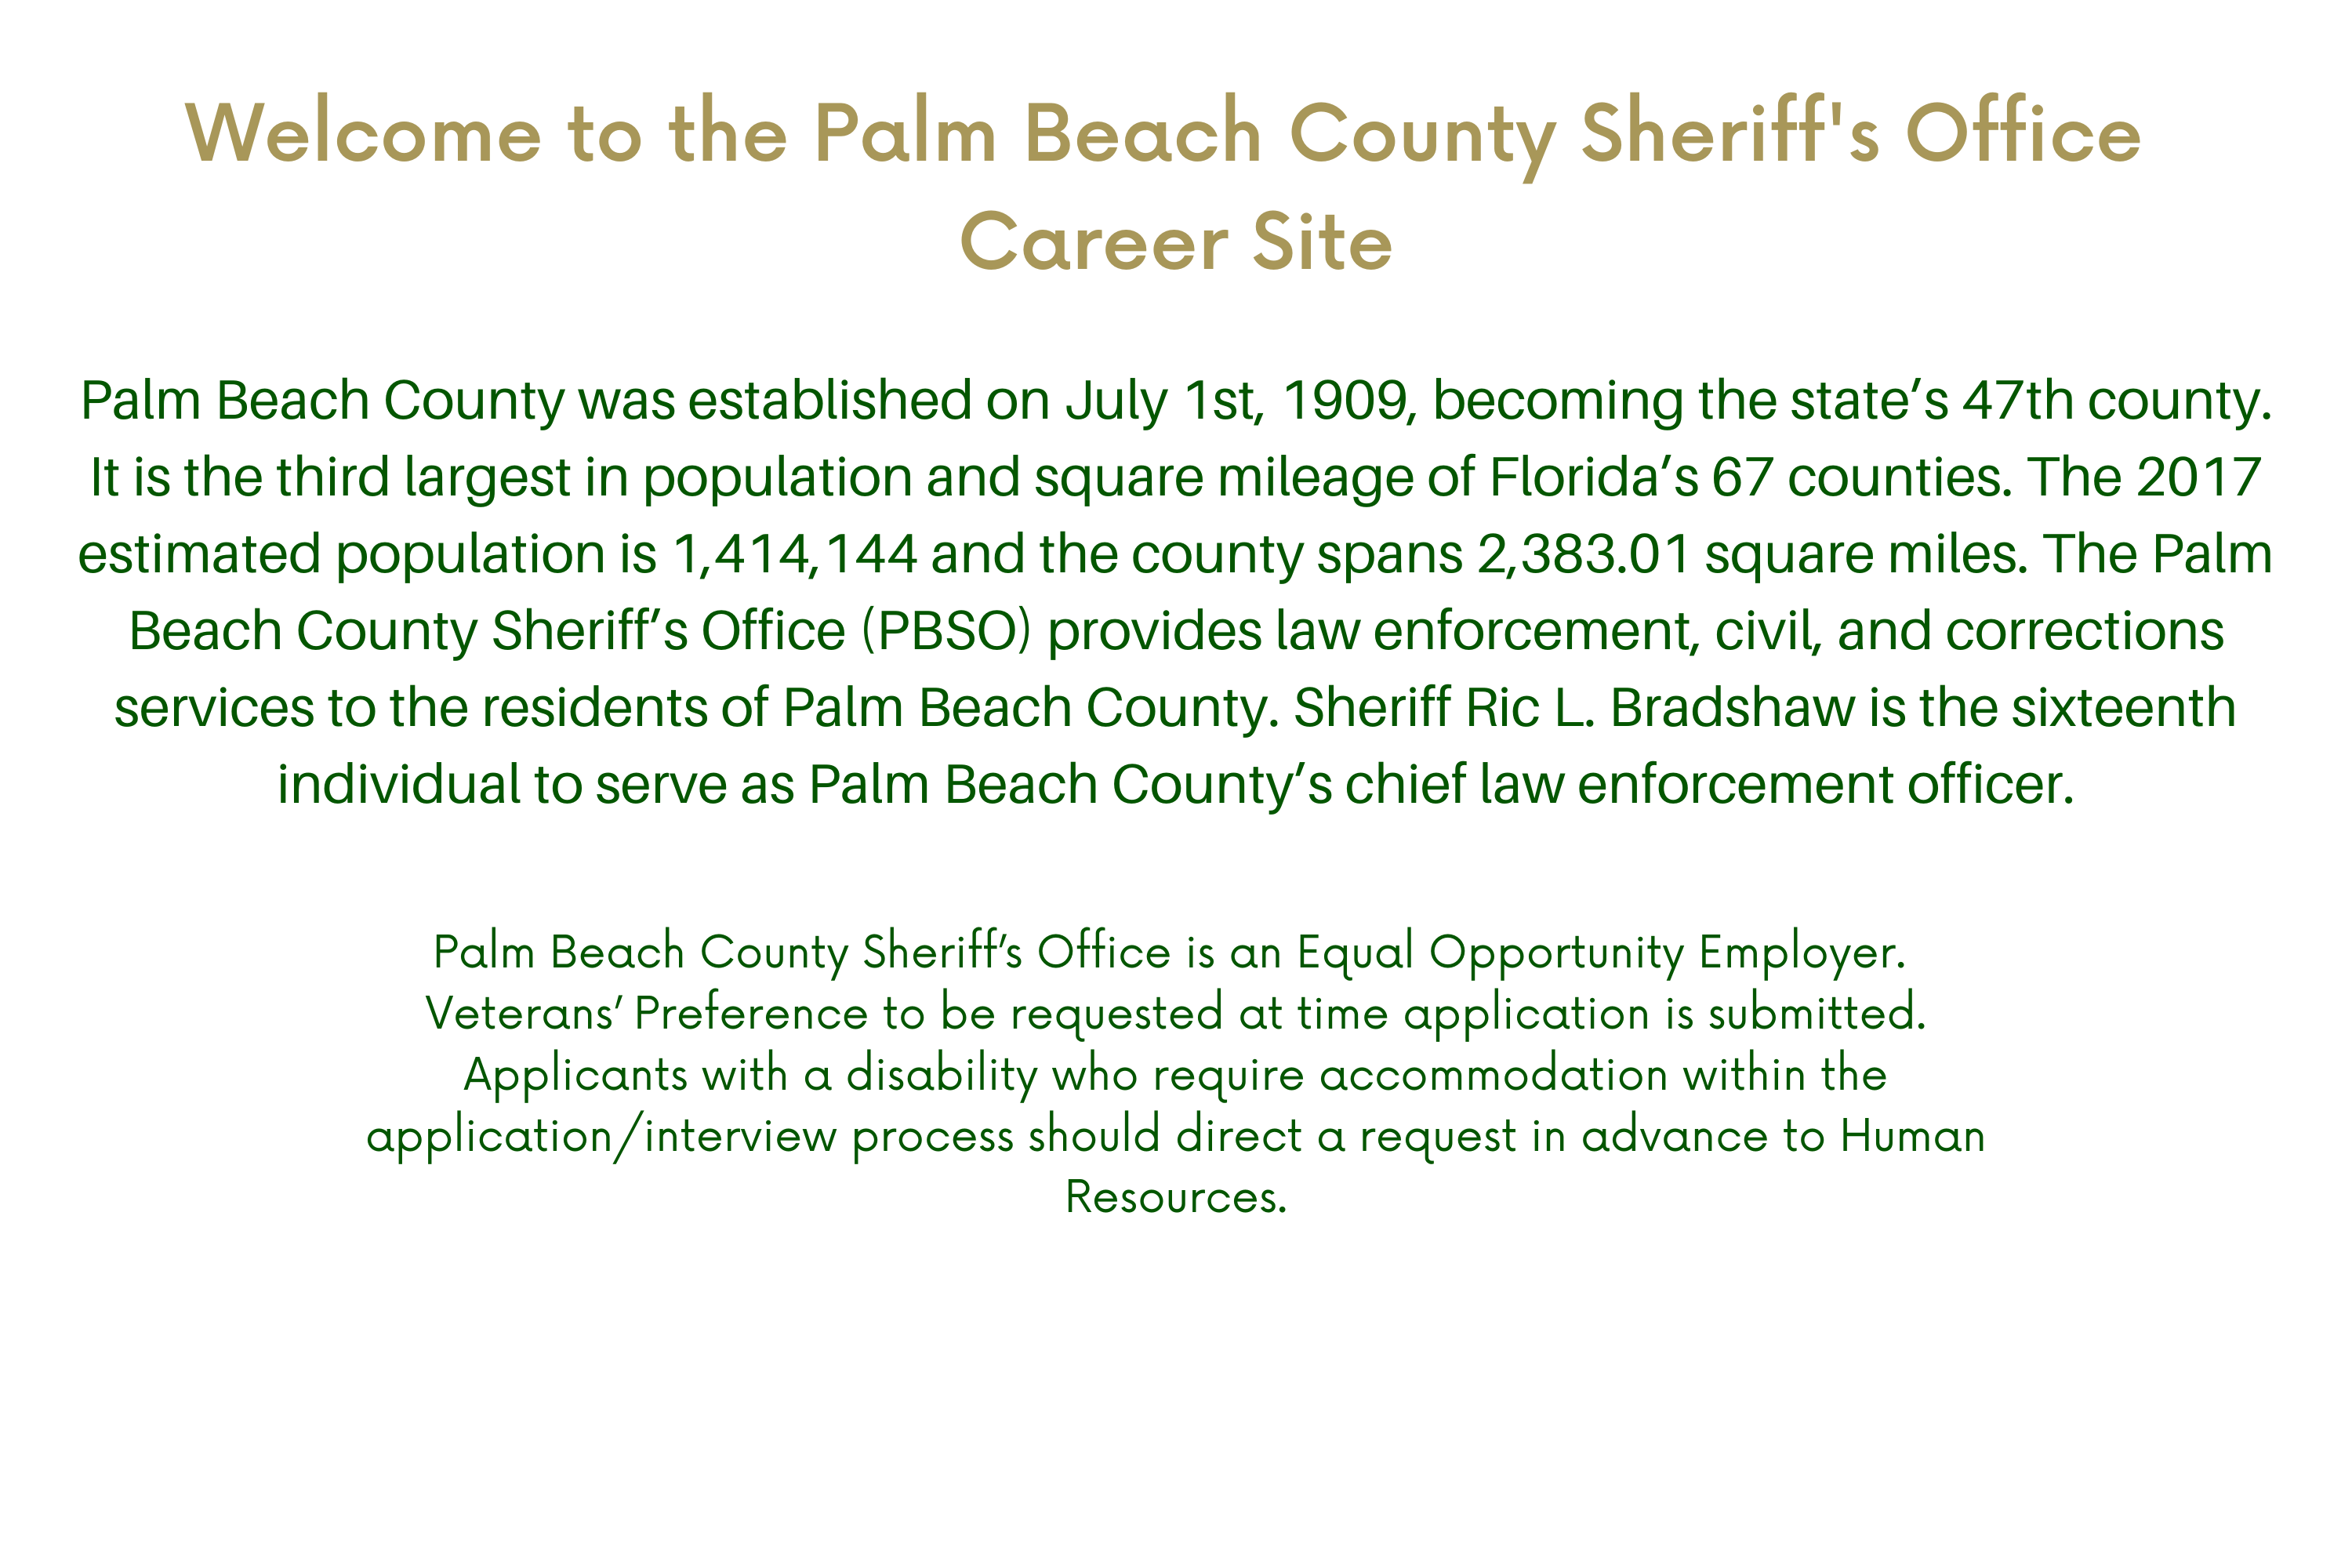 Welcome to the Palm Beach County Sheriff's Office Job Application Site Palm Beach County was established on July 1st, 1909, becoming the state’s 47th county. It is the third largest in population and square